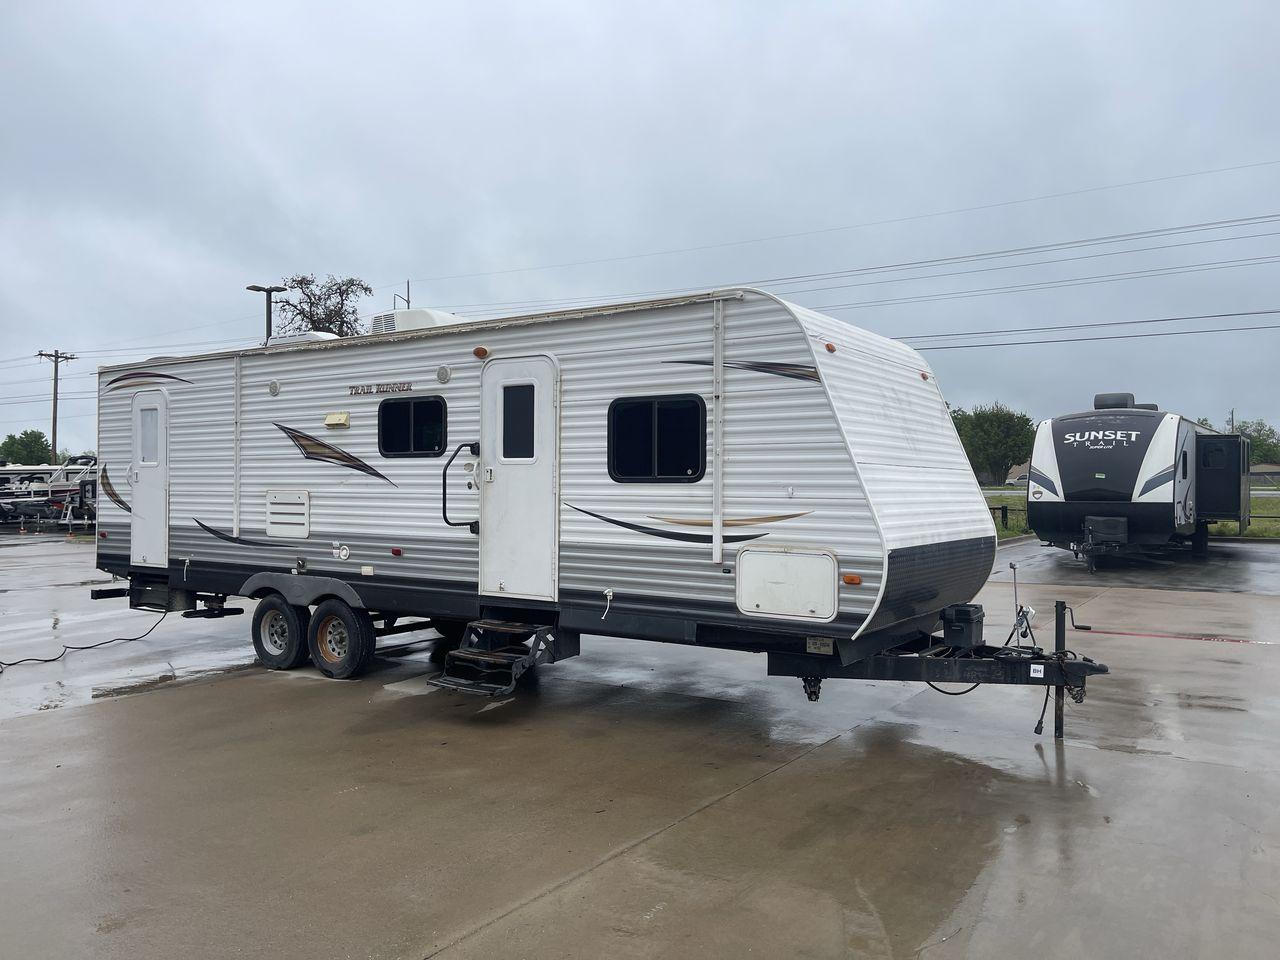 2013 TRAIL RUNNER 29FQBS (5SFEB3228DE) , Length: 32.33 ft. | Dry Weight: 6,724 lbs. | Slides: 1 transmission, located at 4319 N Main Street, Cleburne, TX, 76033, (817) 221-0660, 32.435829, -97.384178 - This 2013 Trail Runner 29FQBS is a single-slide travel trailer measuring approximately 32.33 feet long. It has a dry weight of 6,724 lbs. and a carrying capacity of 2,276 lbs. It also has a manageable hitch weight of 738 lbs. As you enter the camper, you will find the kitchen section immediately to - Photo #22